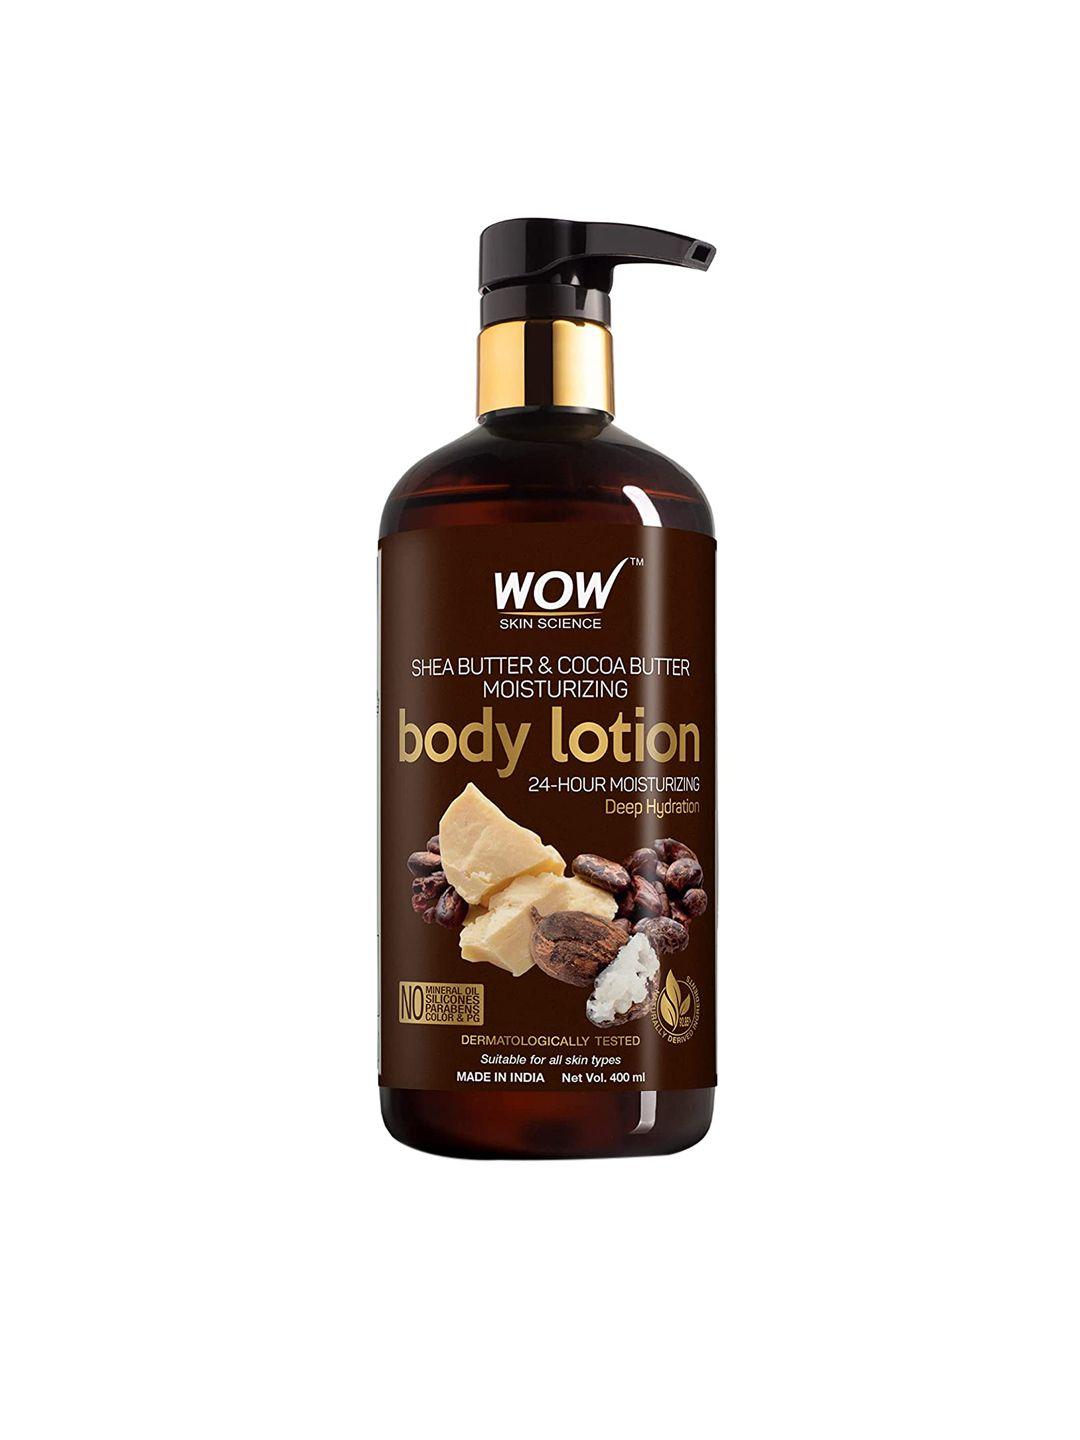 wow skin science shea butter and cocoa butter moisturizing body lotion- 400ml